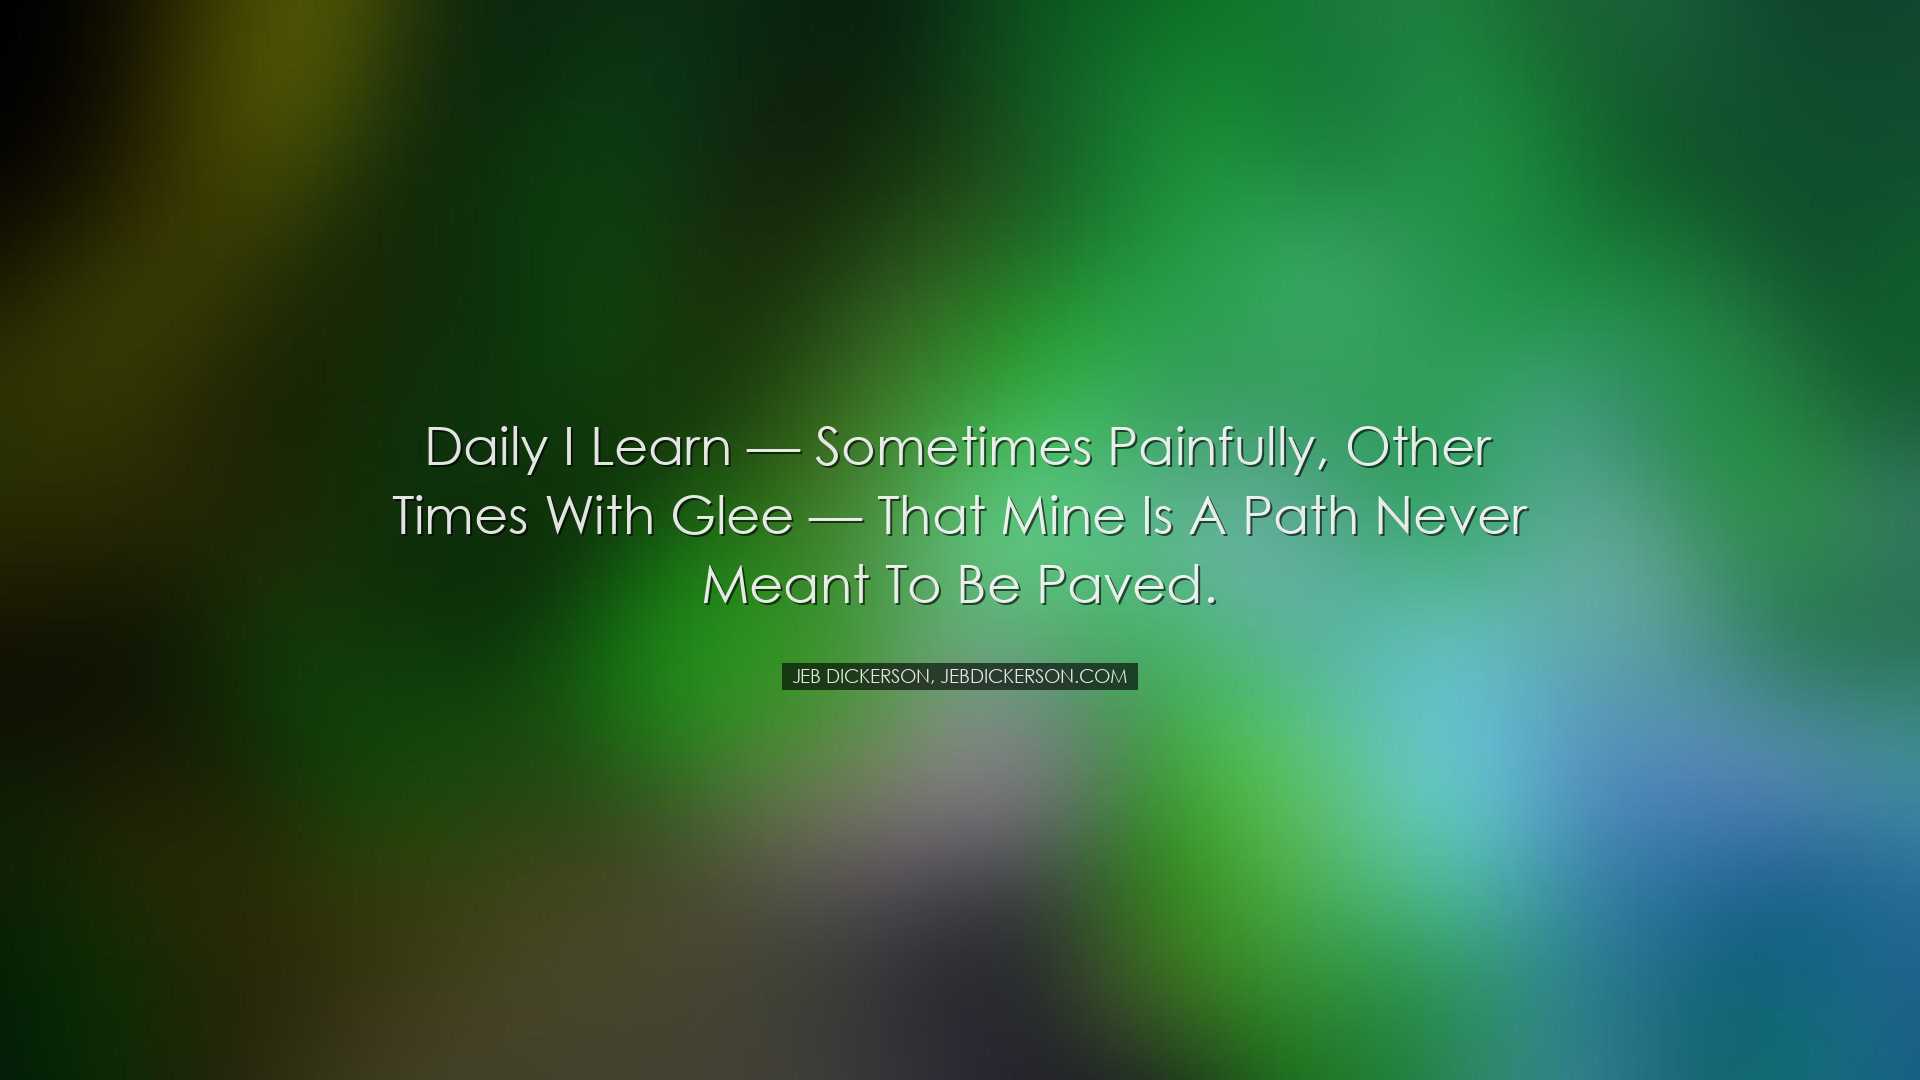 Daily I learn â€” sometimes painfully, other times with glee